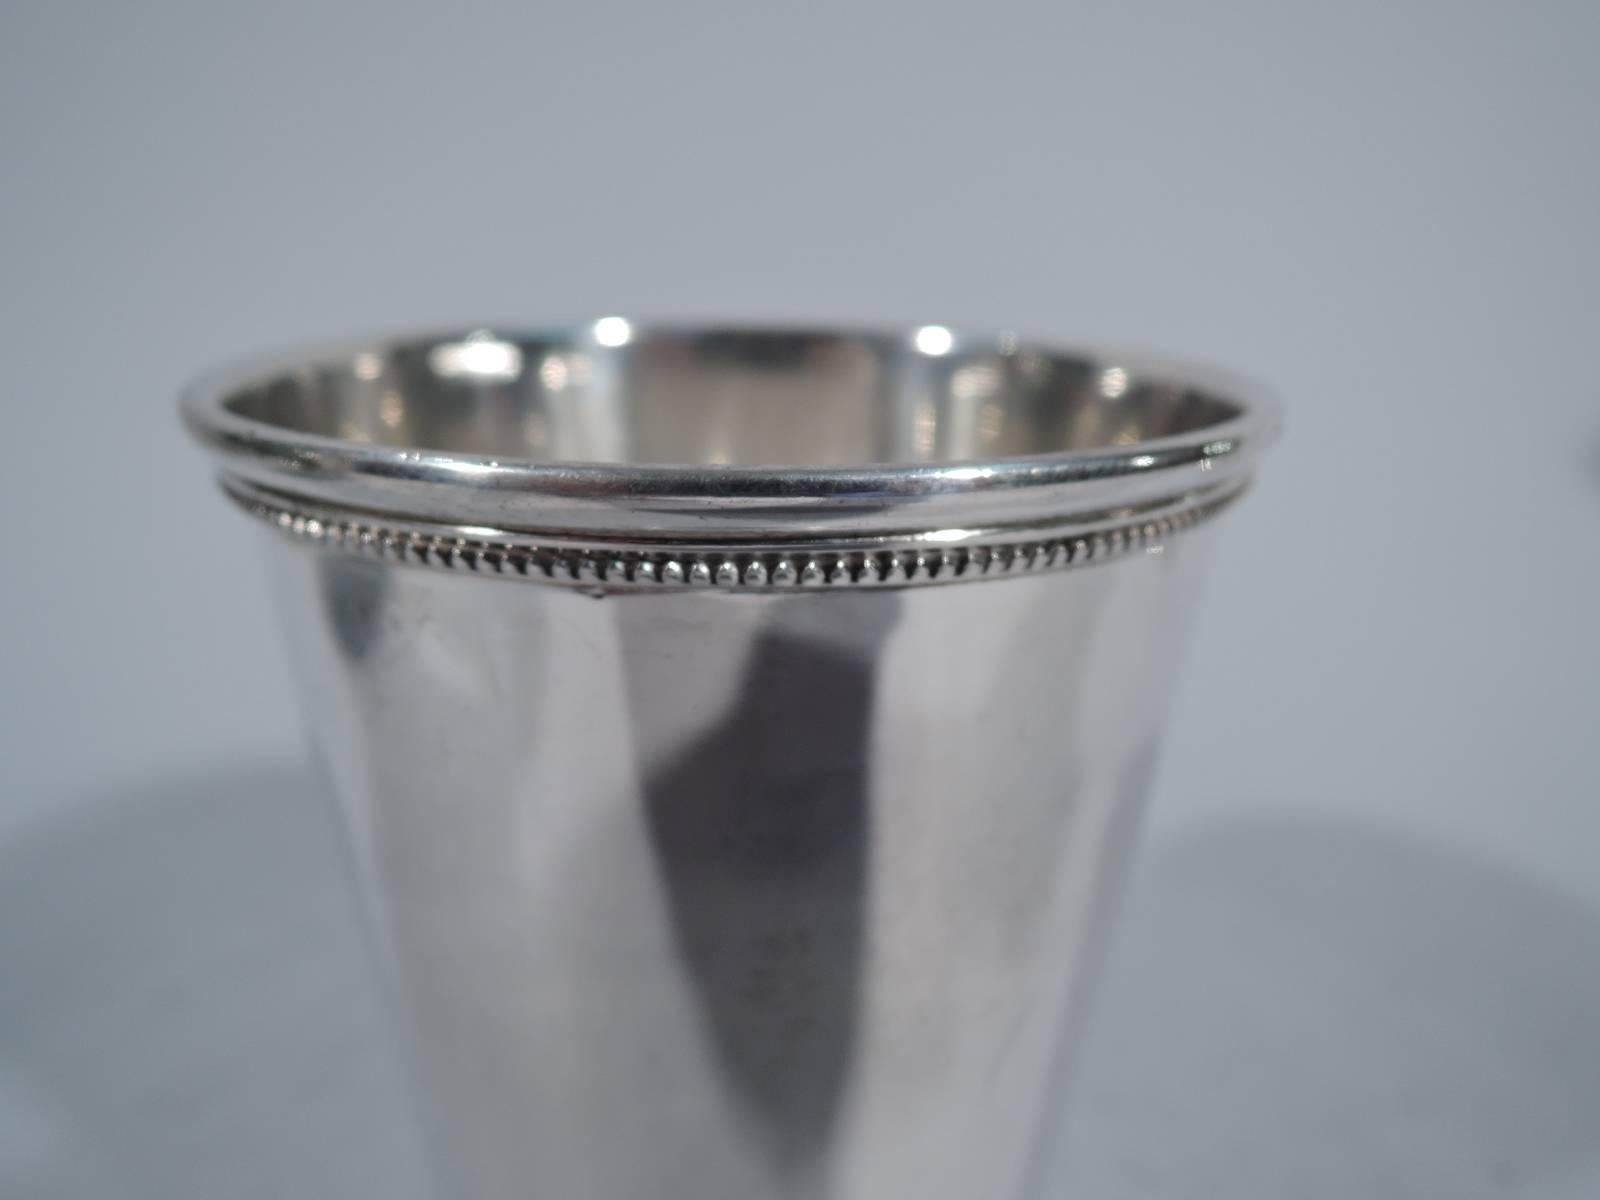 Sterling silver mint julep cup. Made by International in Meriden, Conn. Straight and tapering sides, molded and beaded rim, and beaded and spread foot. Hallmark includes name Patrick Henry and no. 103/25. Very good condition.

Dimensions: 4 1/8 x